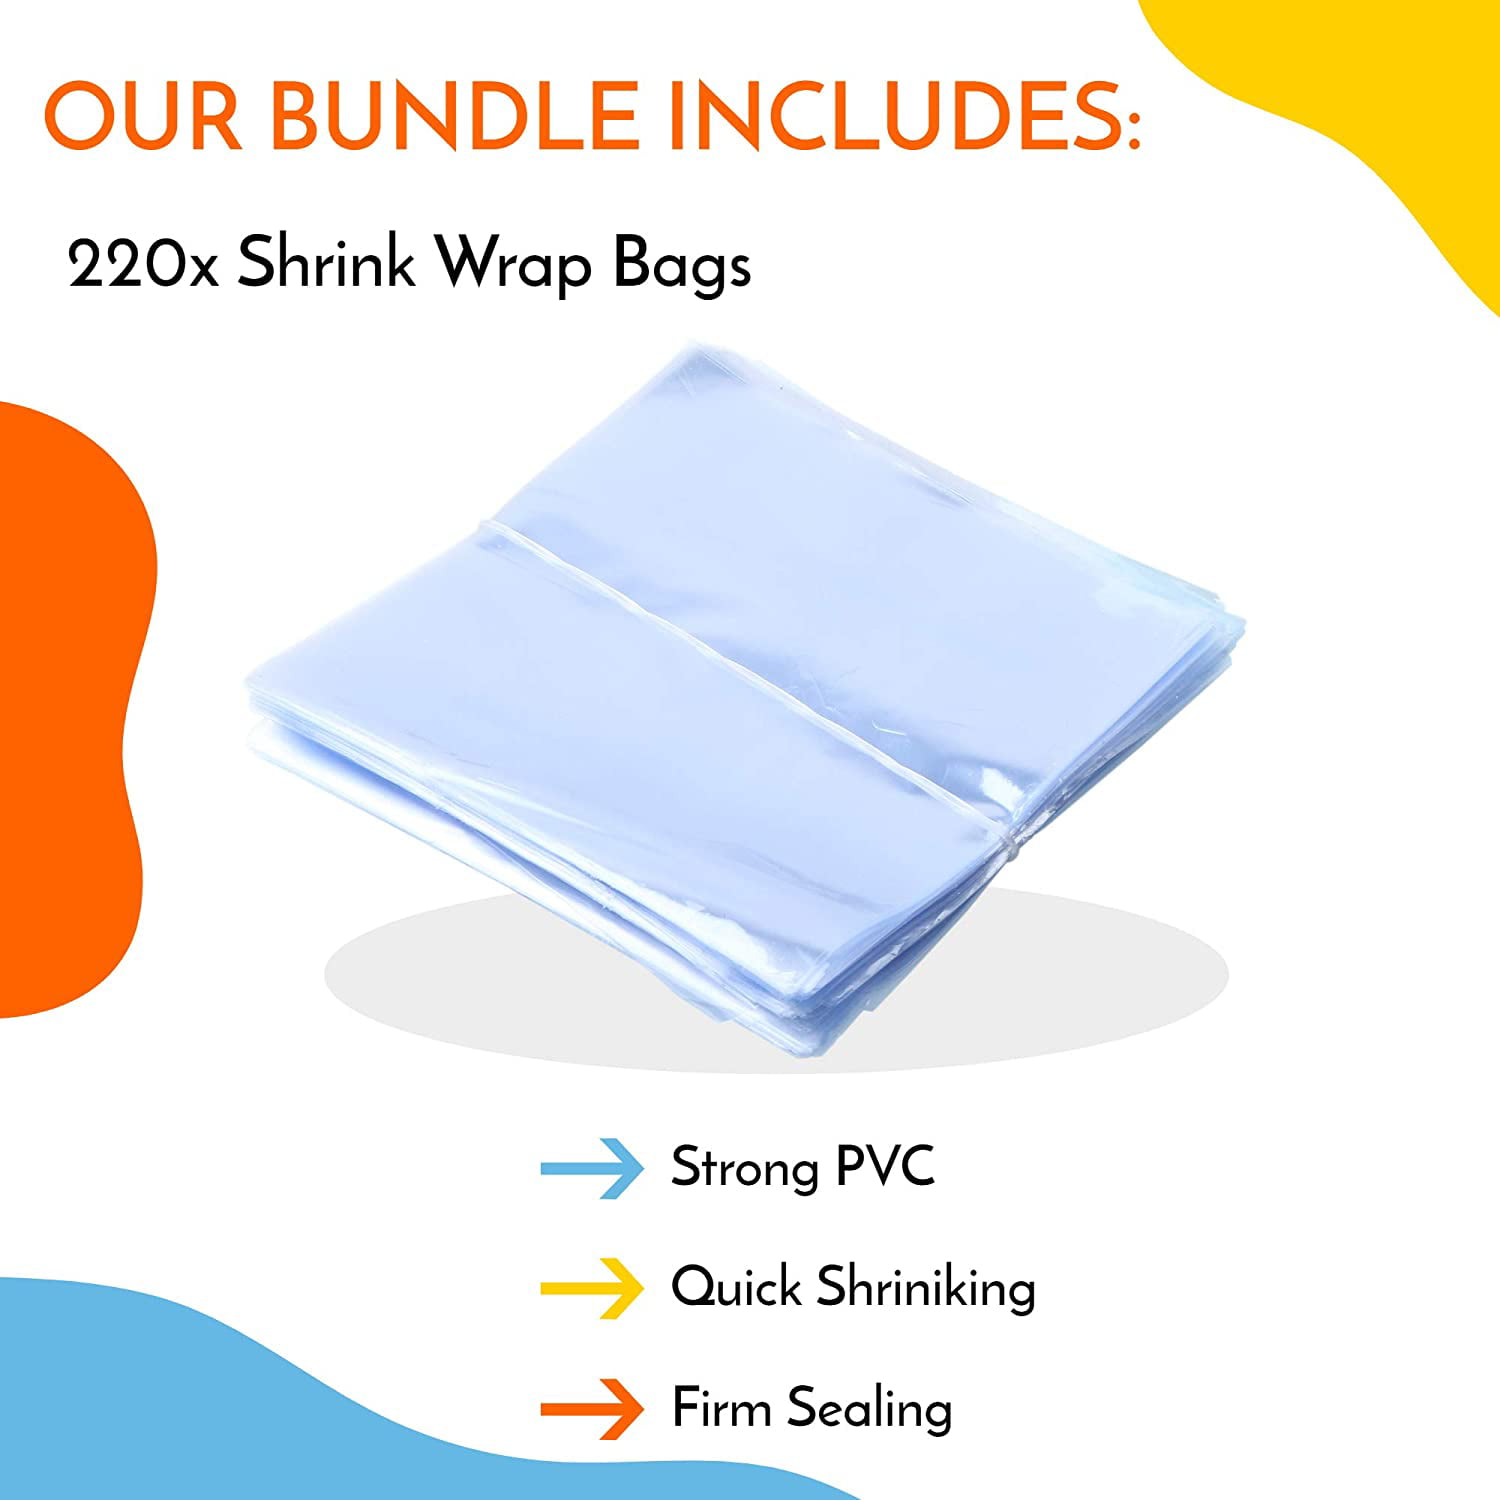 Morepack Shrink Wrap Bags,200 Pcs 6x6 Inches Clear PVC Heat Shrink Wrap for Packagaing Soap,Bath Bombs,Candles,Small Gifts, Jars and Homemade DIY